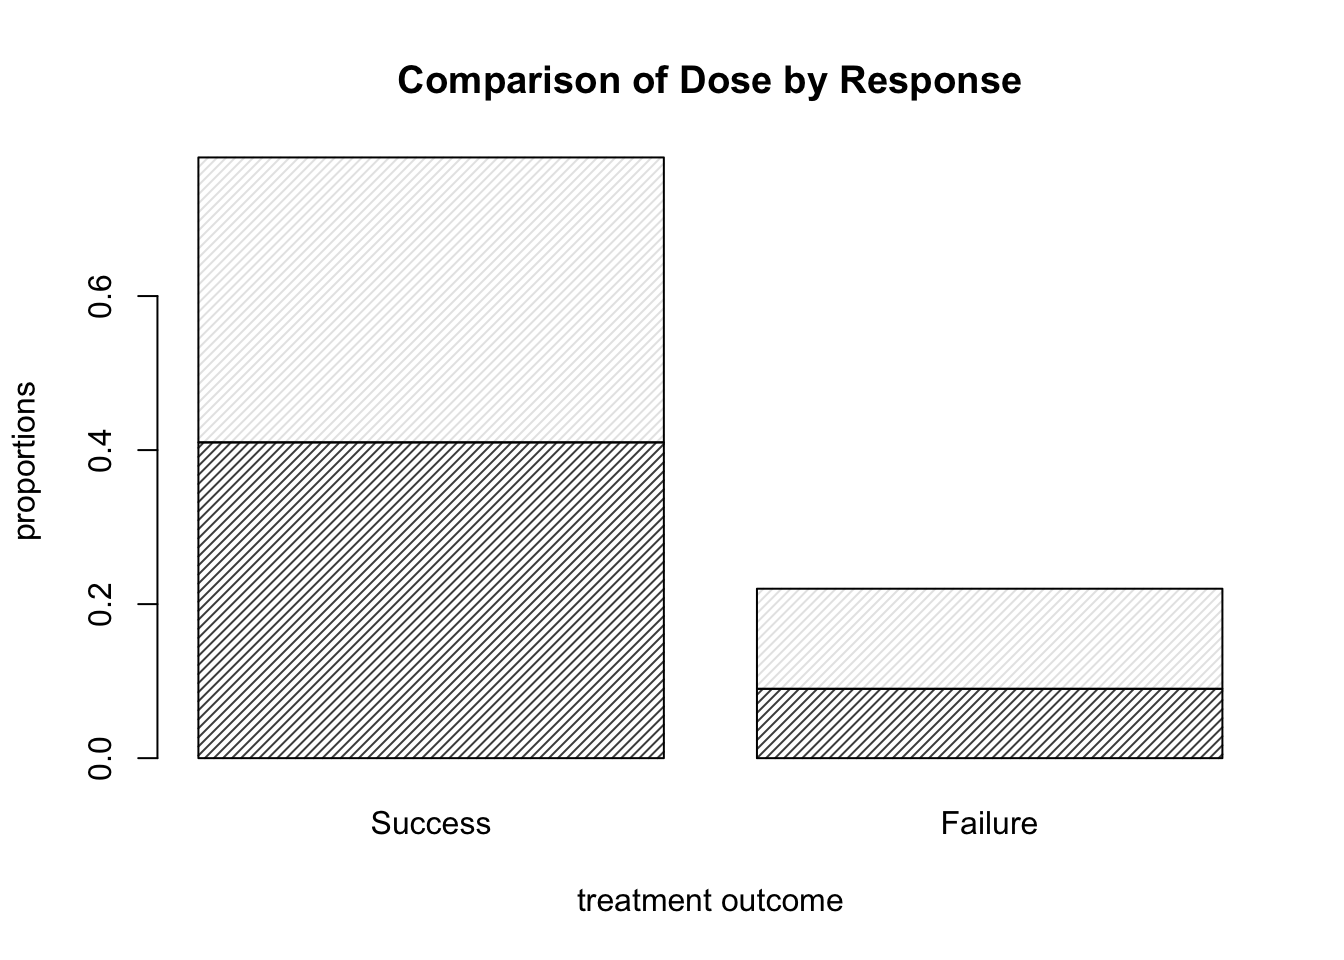 Barplots of the Dose-Result contingency table data, now with title and axis labels.